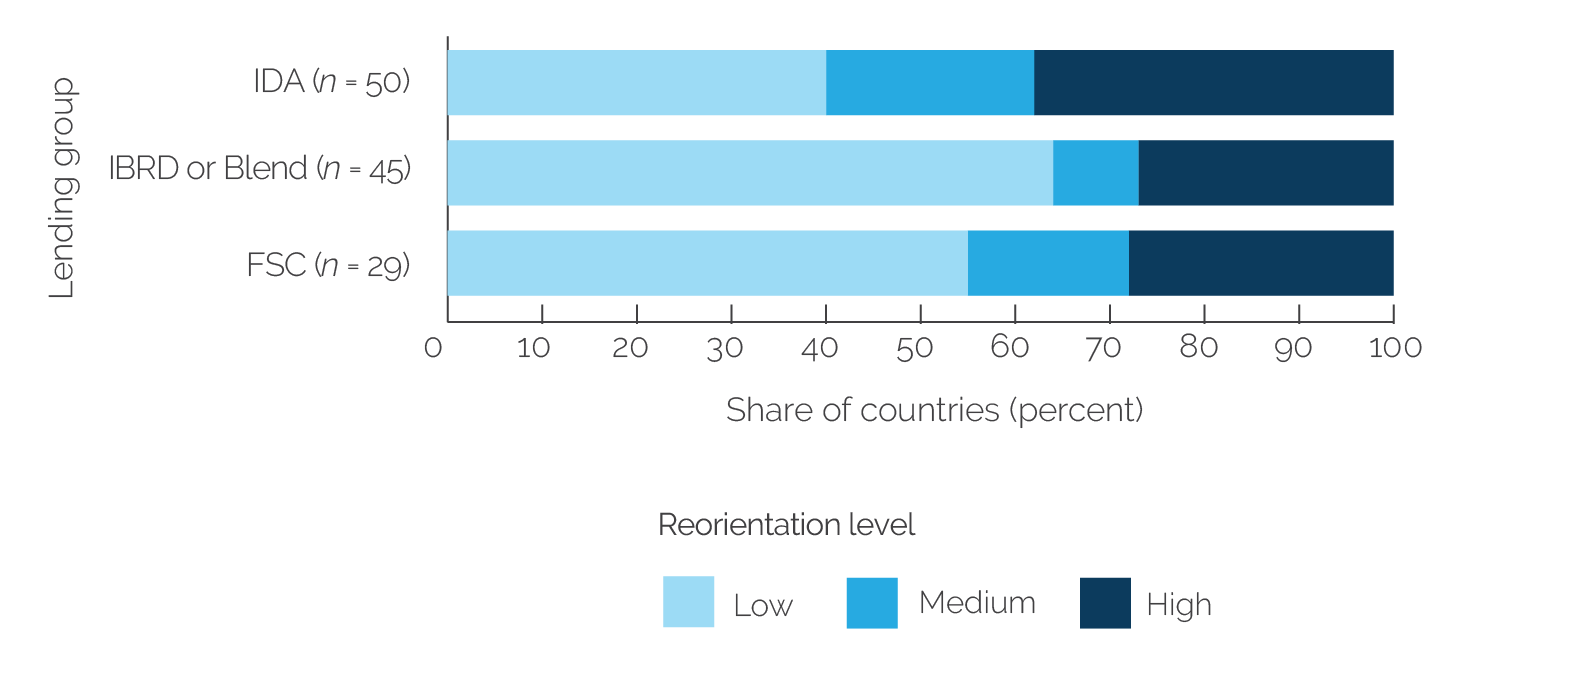 The bar graph shows that about of the countries assessed had a medium to high level of portfolio reorientation to support the response, especially IDA countries.